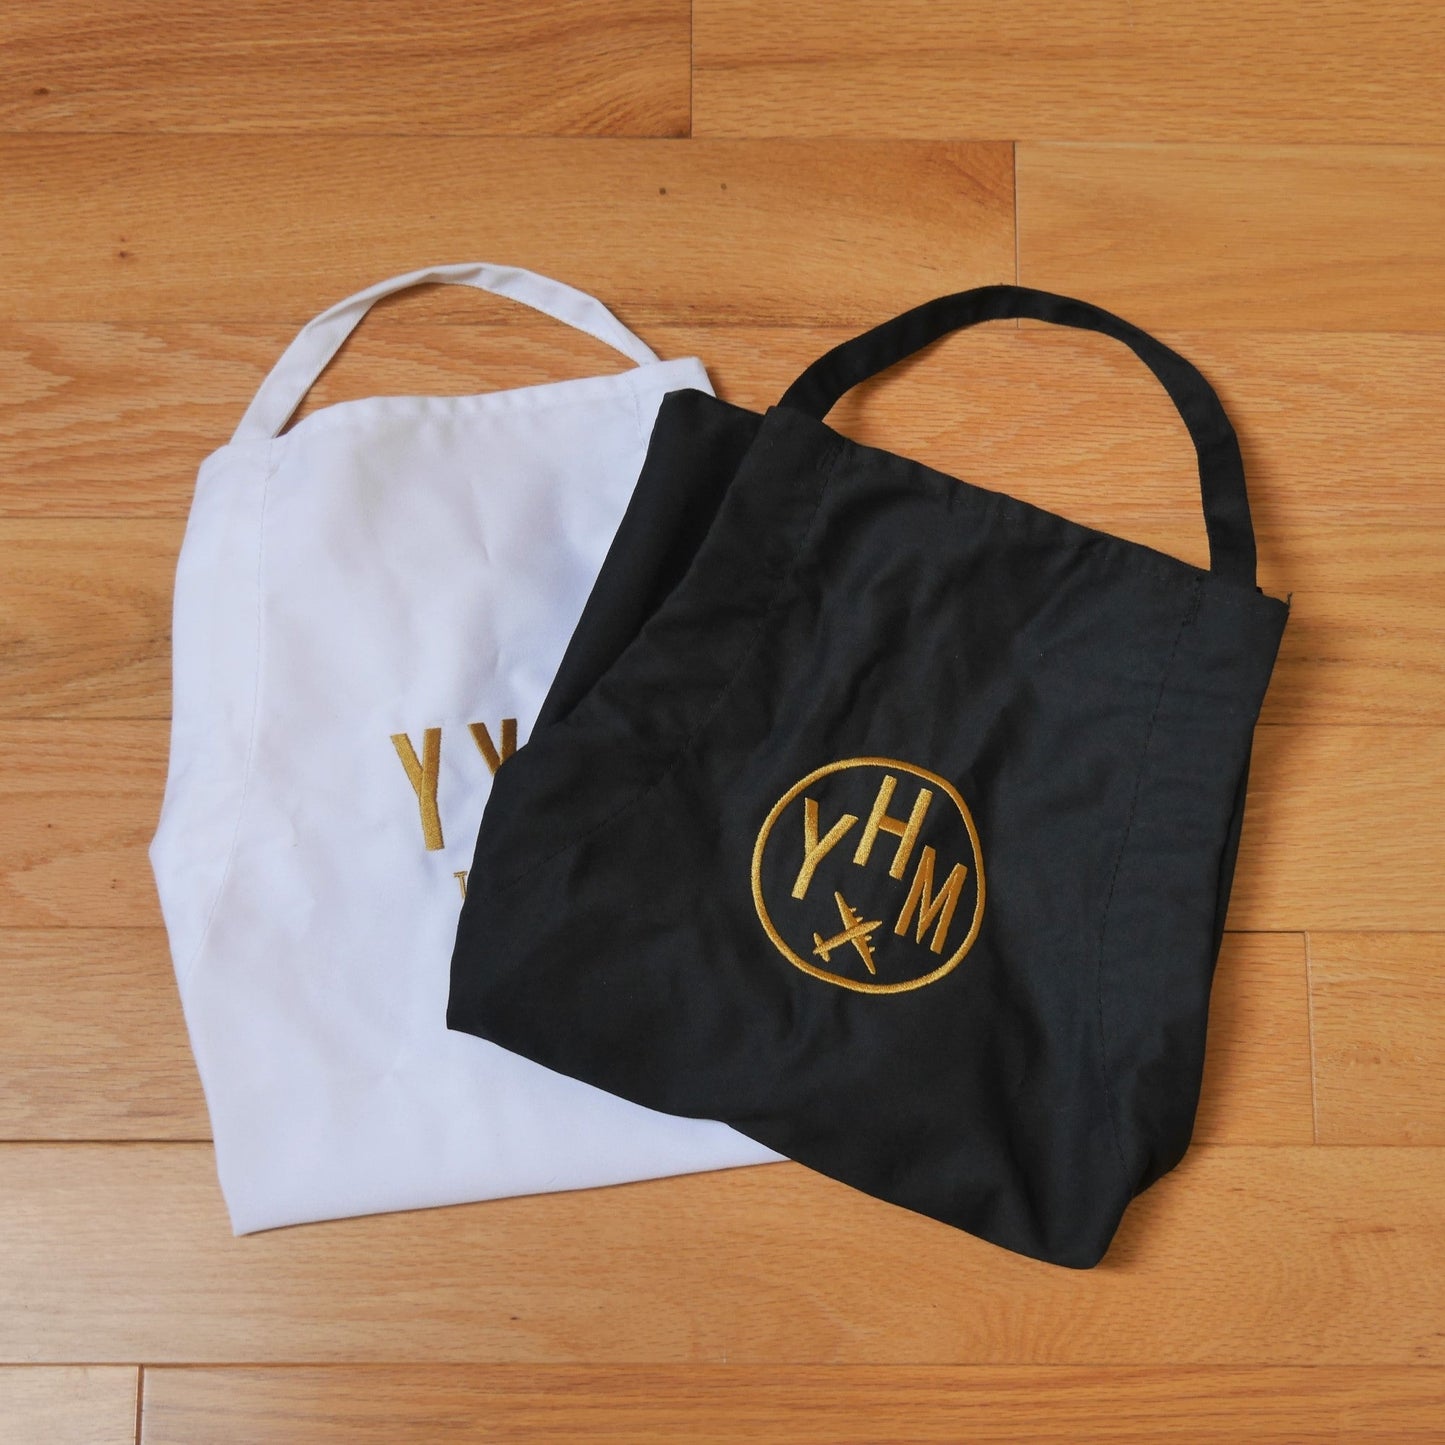 City Embroidered Apron - Old Gold • AUS Austin • YHM Designs - Image 14